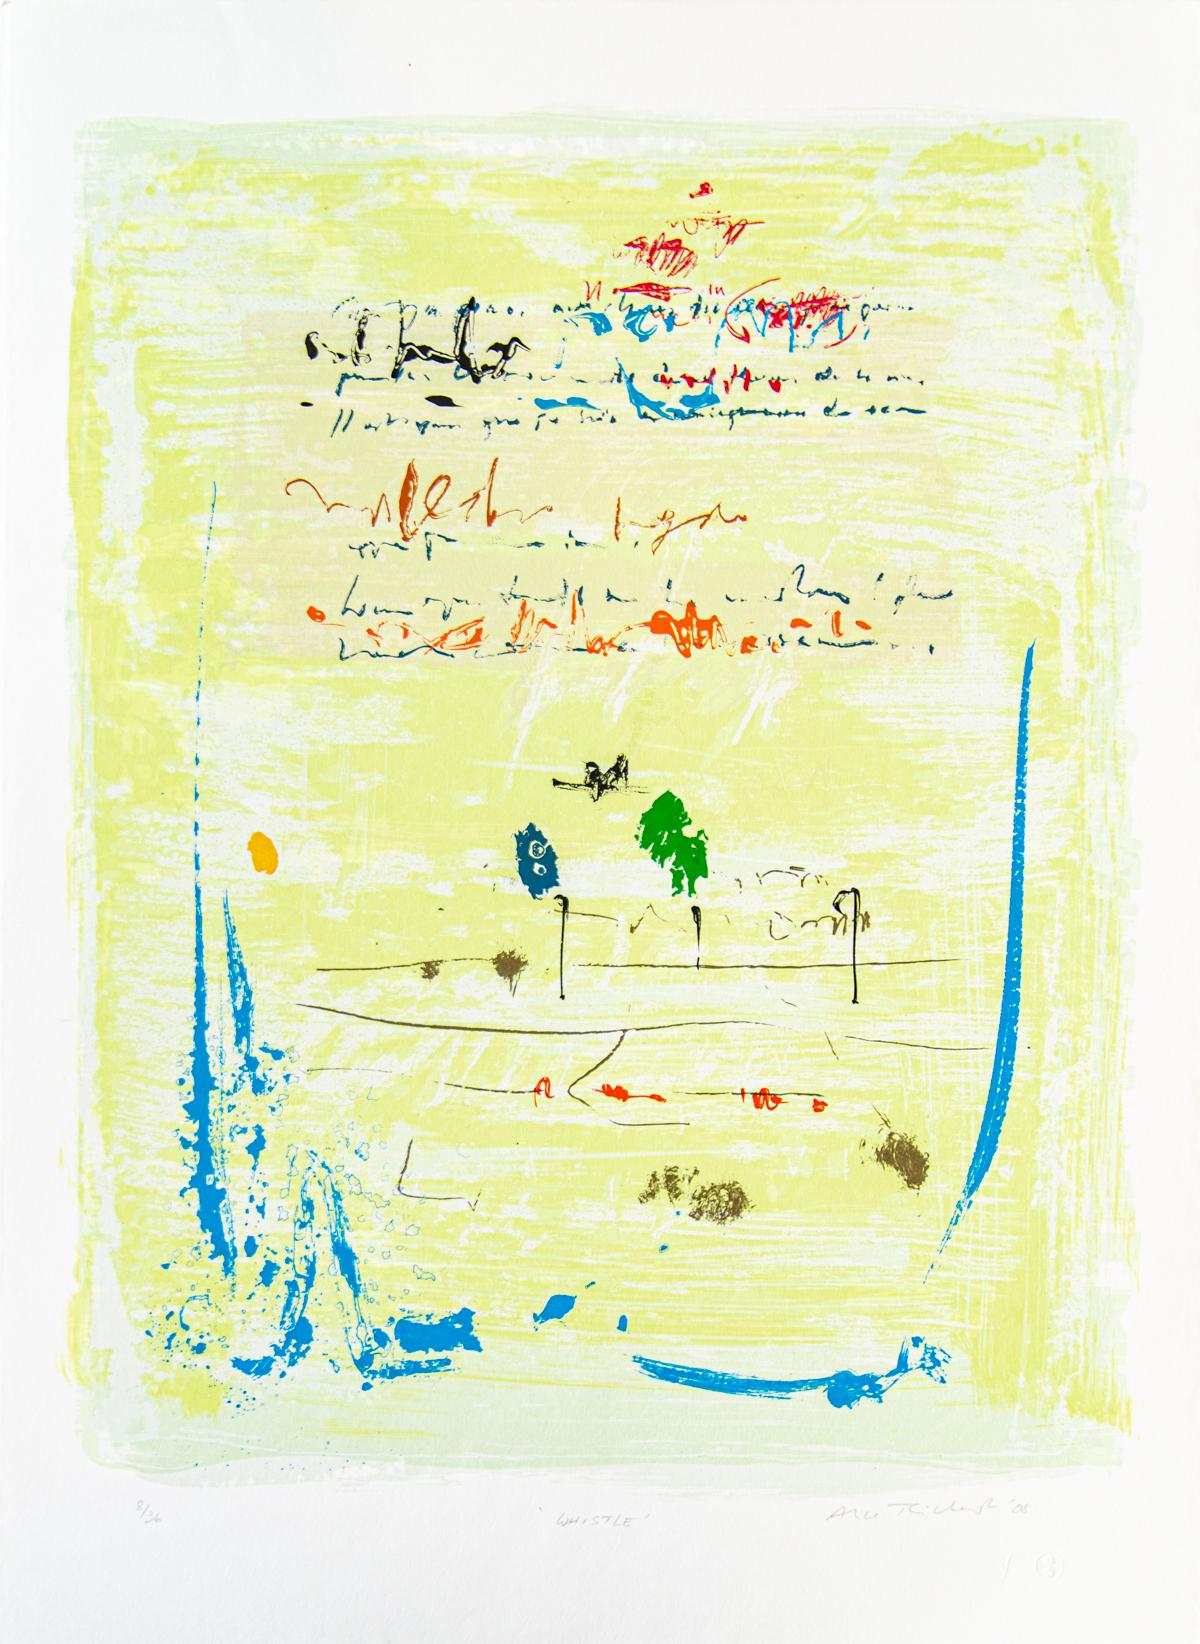 Alice Teichert Figurative Print - Text - Whistle 9/36 - colorful, calligraphic gestures, serigraph on paper 